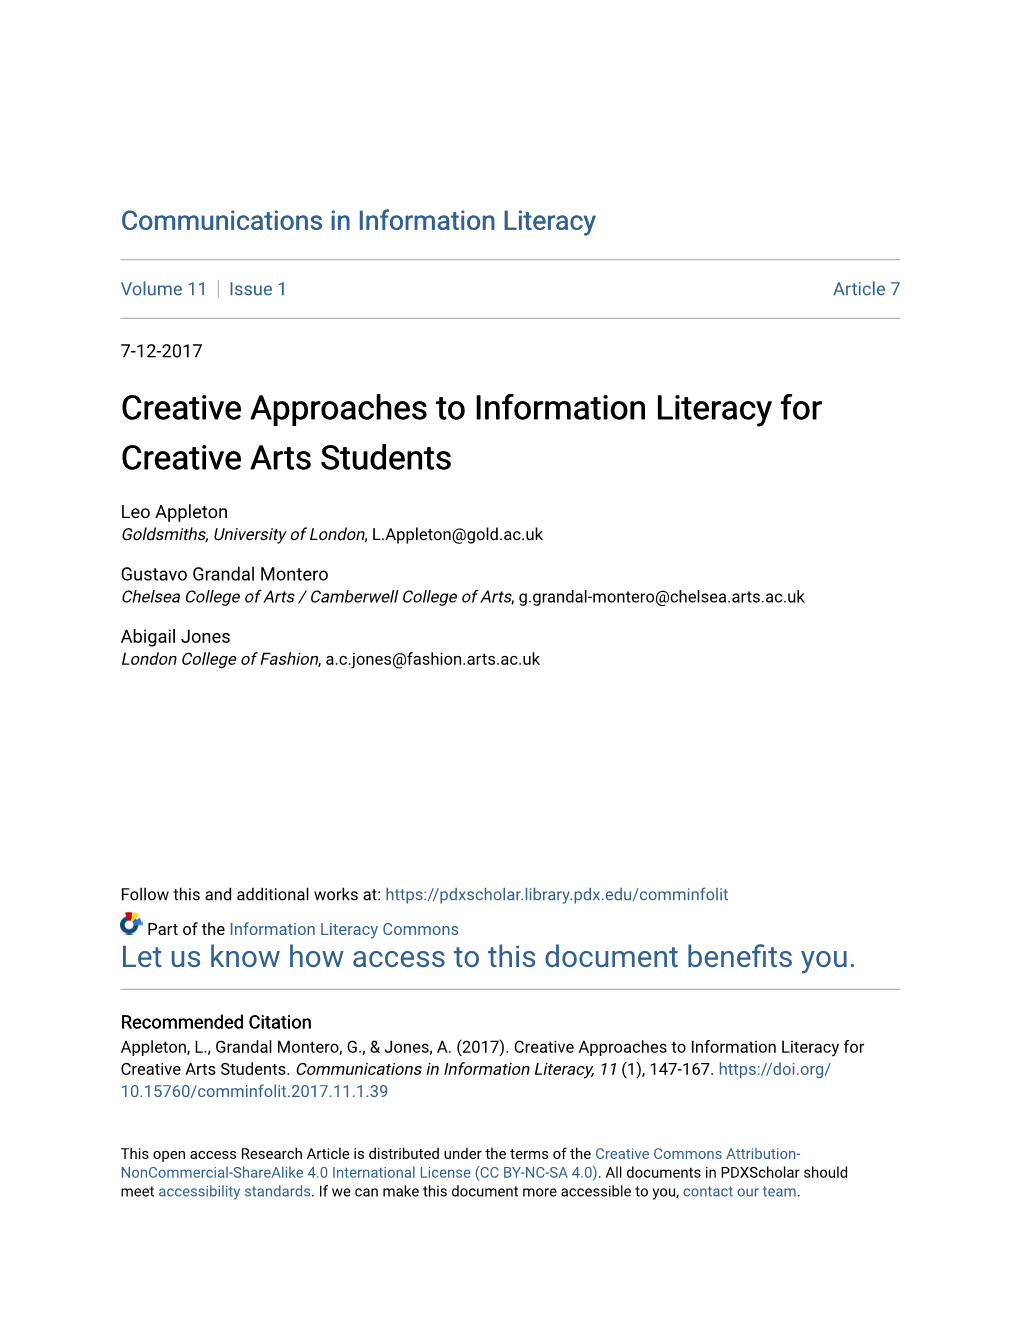 Creative Approaches to Information Literacy for Creative Arts Students